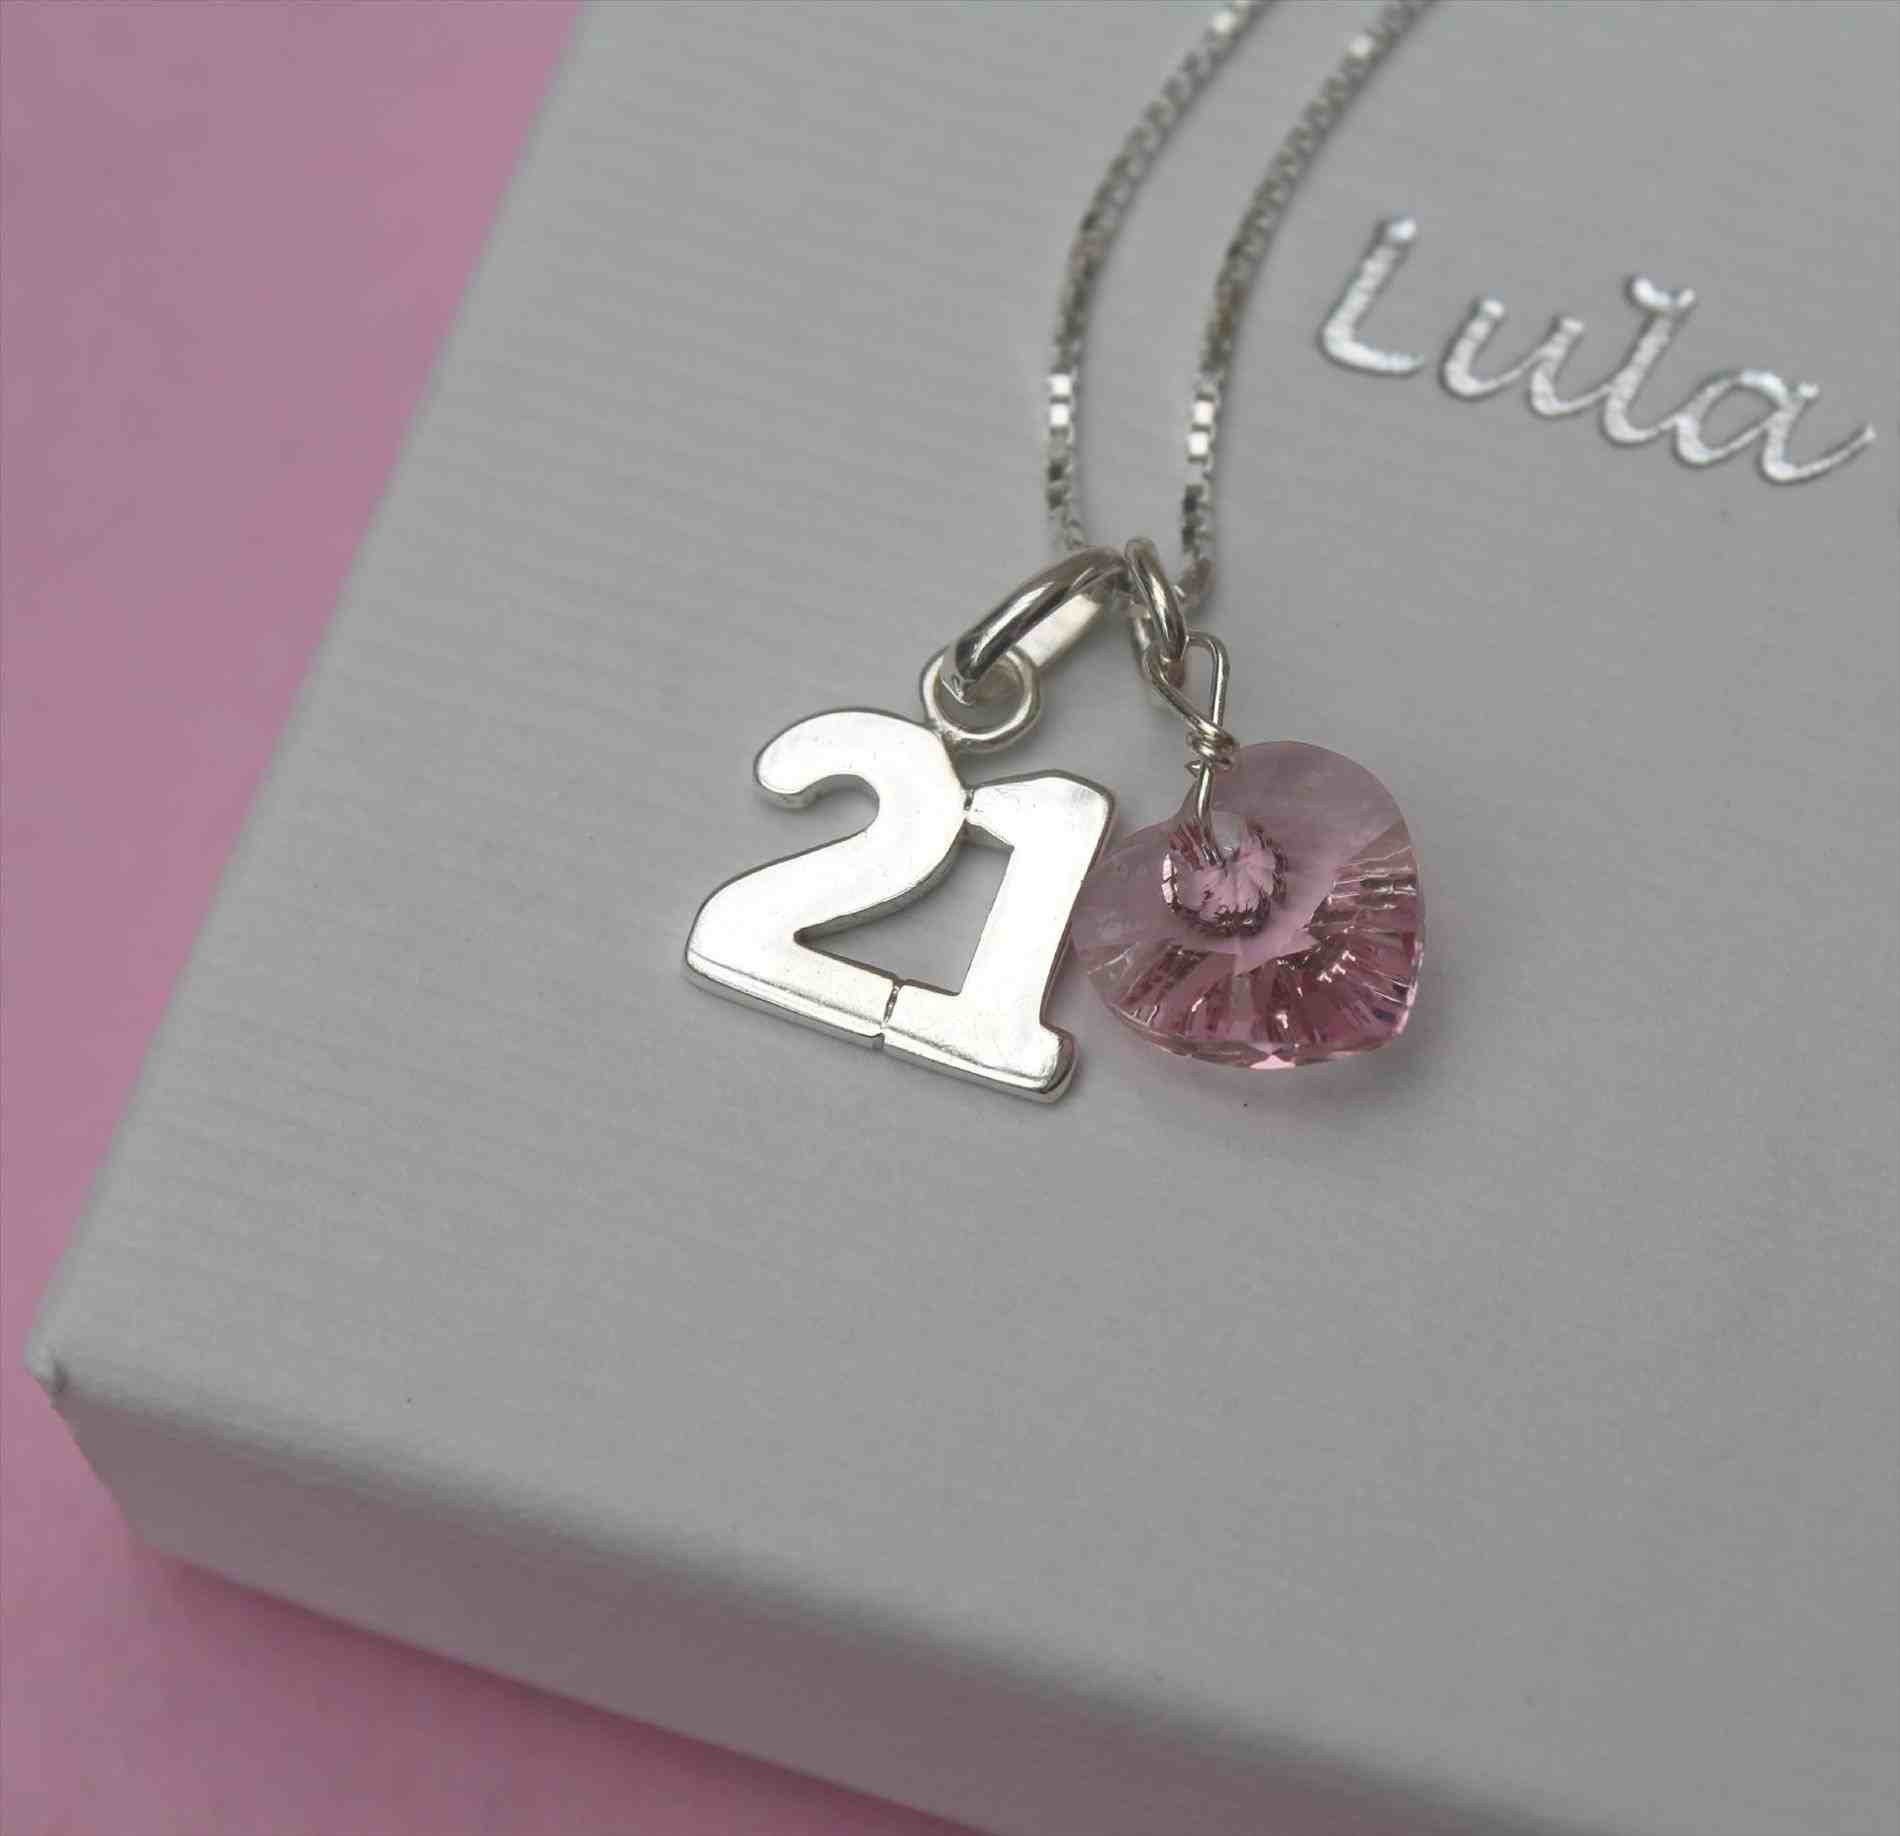 Birthday Gift Ideas Daughter
 More About 21st birthday t ideas for daughter Update